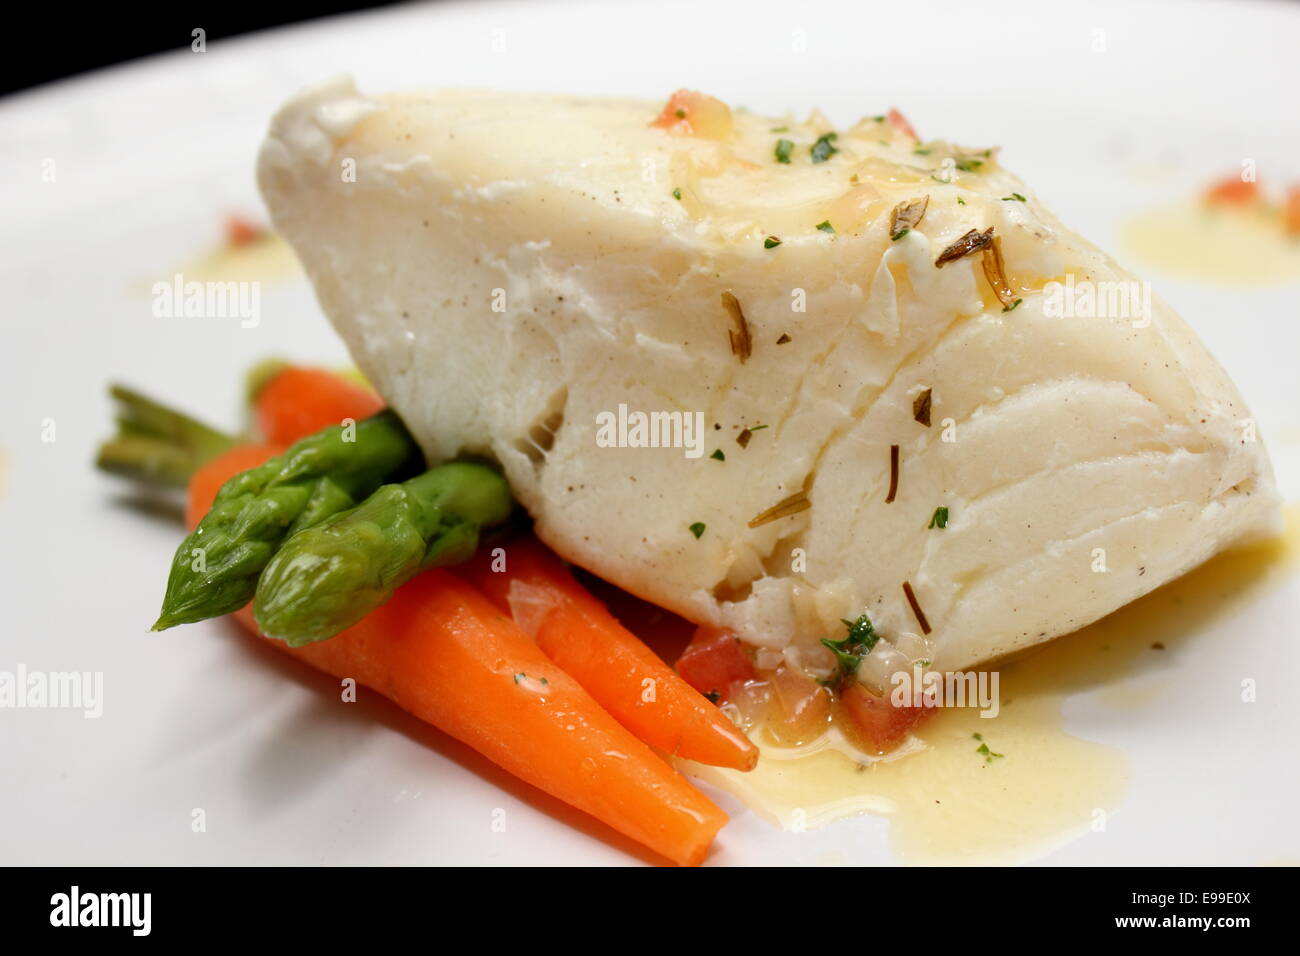 A grilled Pangasius fish steak, isolated on a white plate Stock Photo